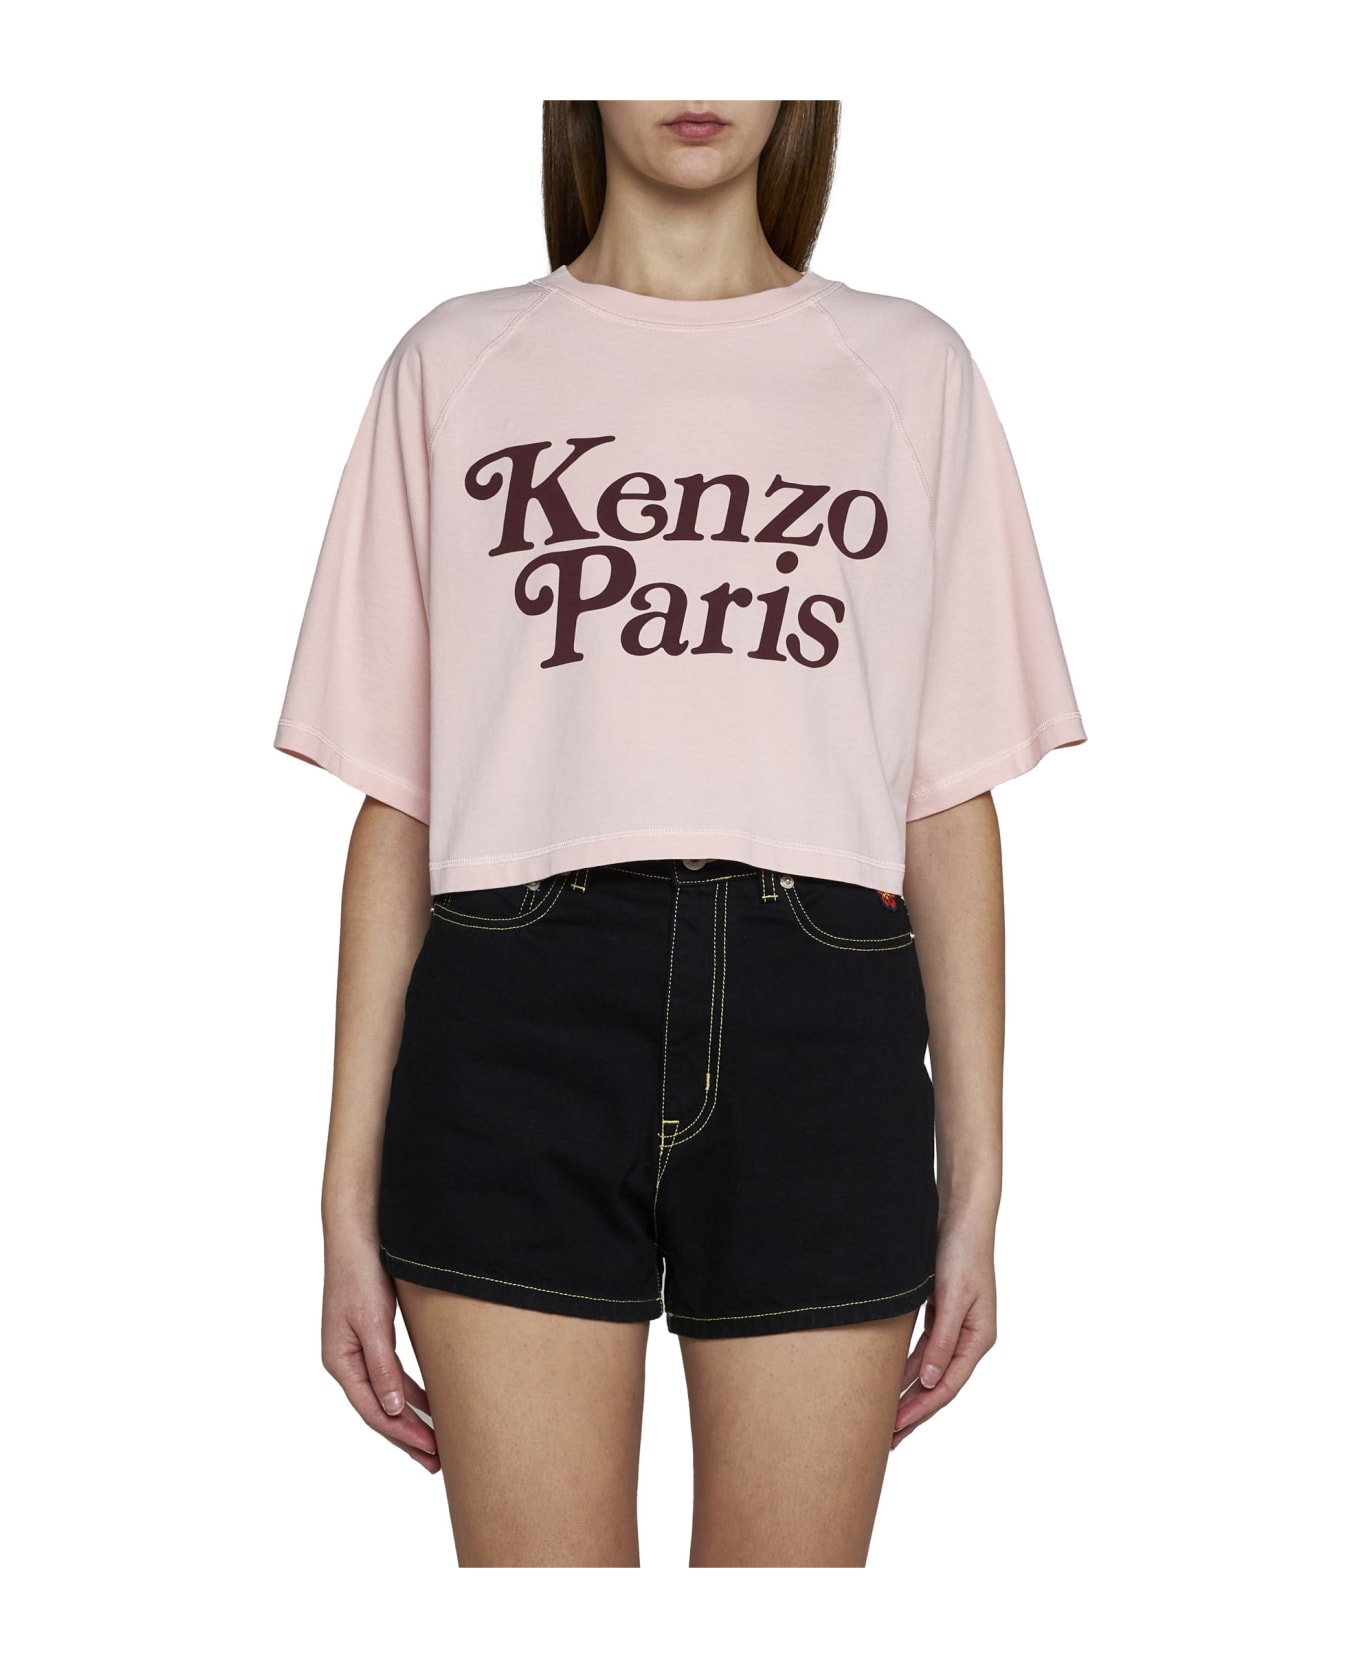 Kenzo T-Shirt - Faded pink Tシャツ